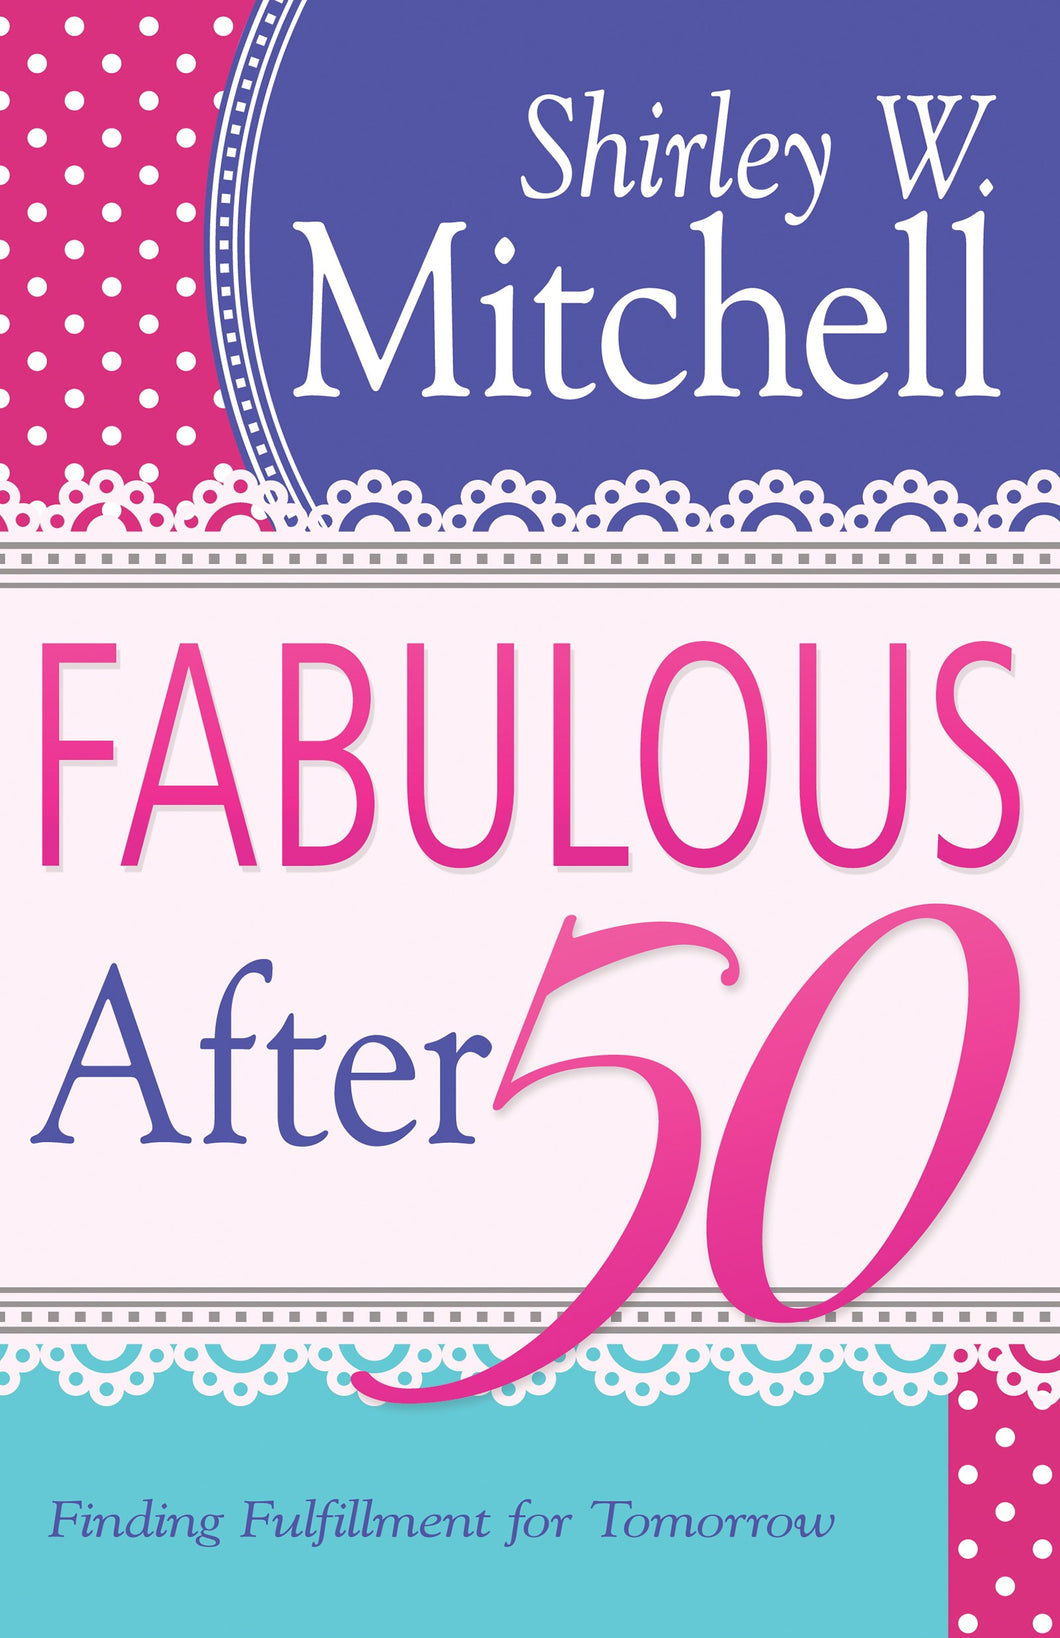 Fabulous After 50